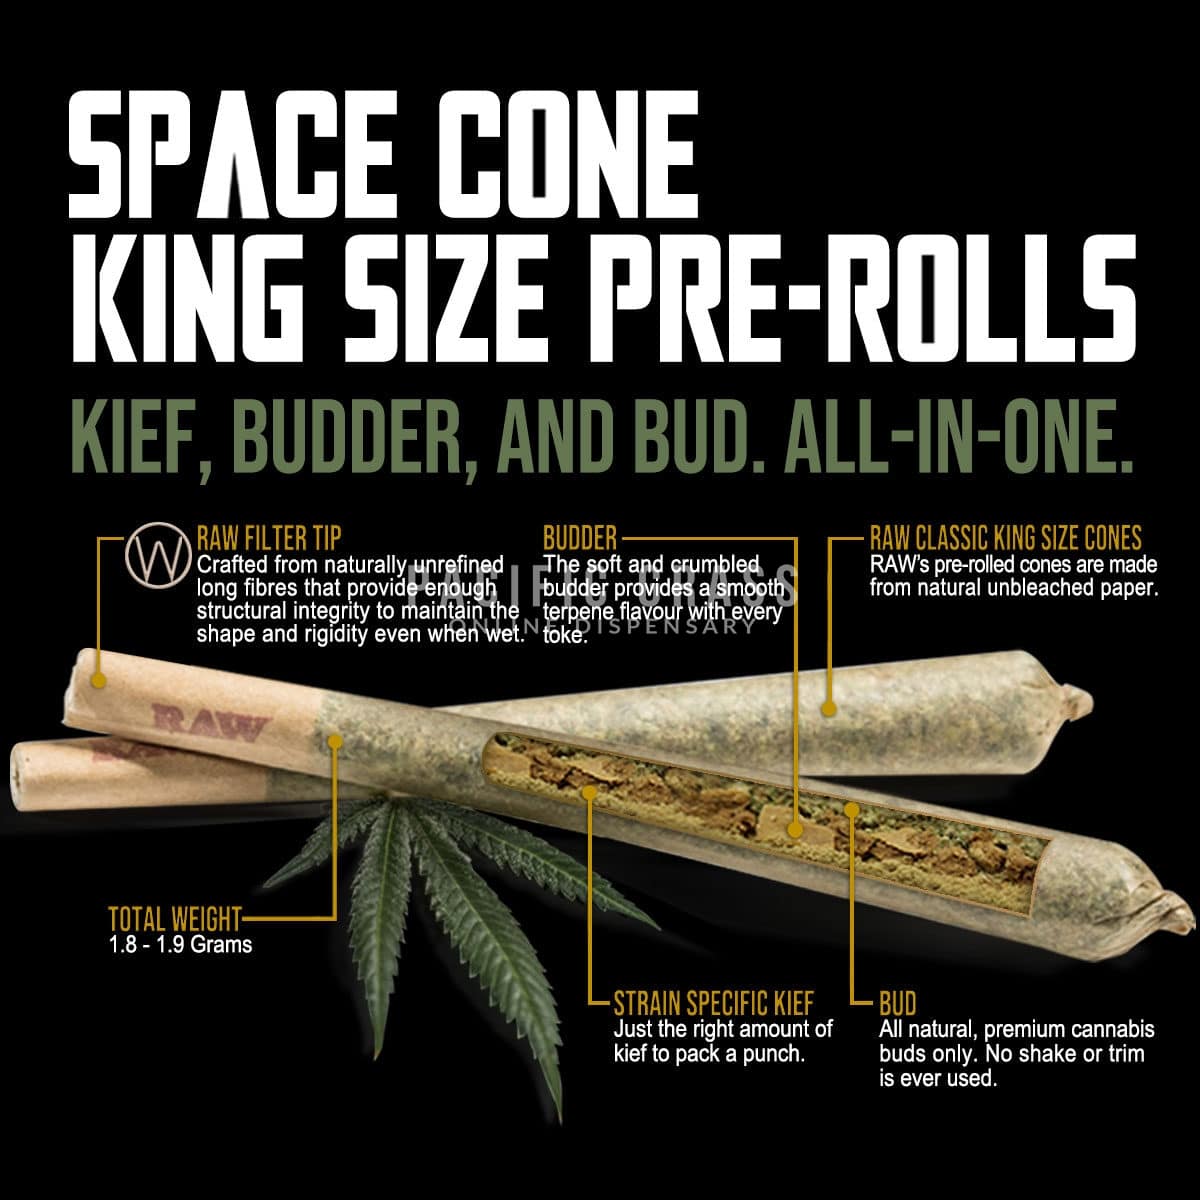 Space Cone King Size Pre-rolls